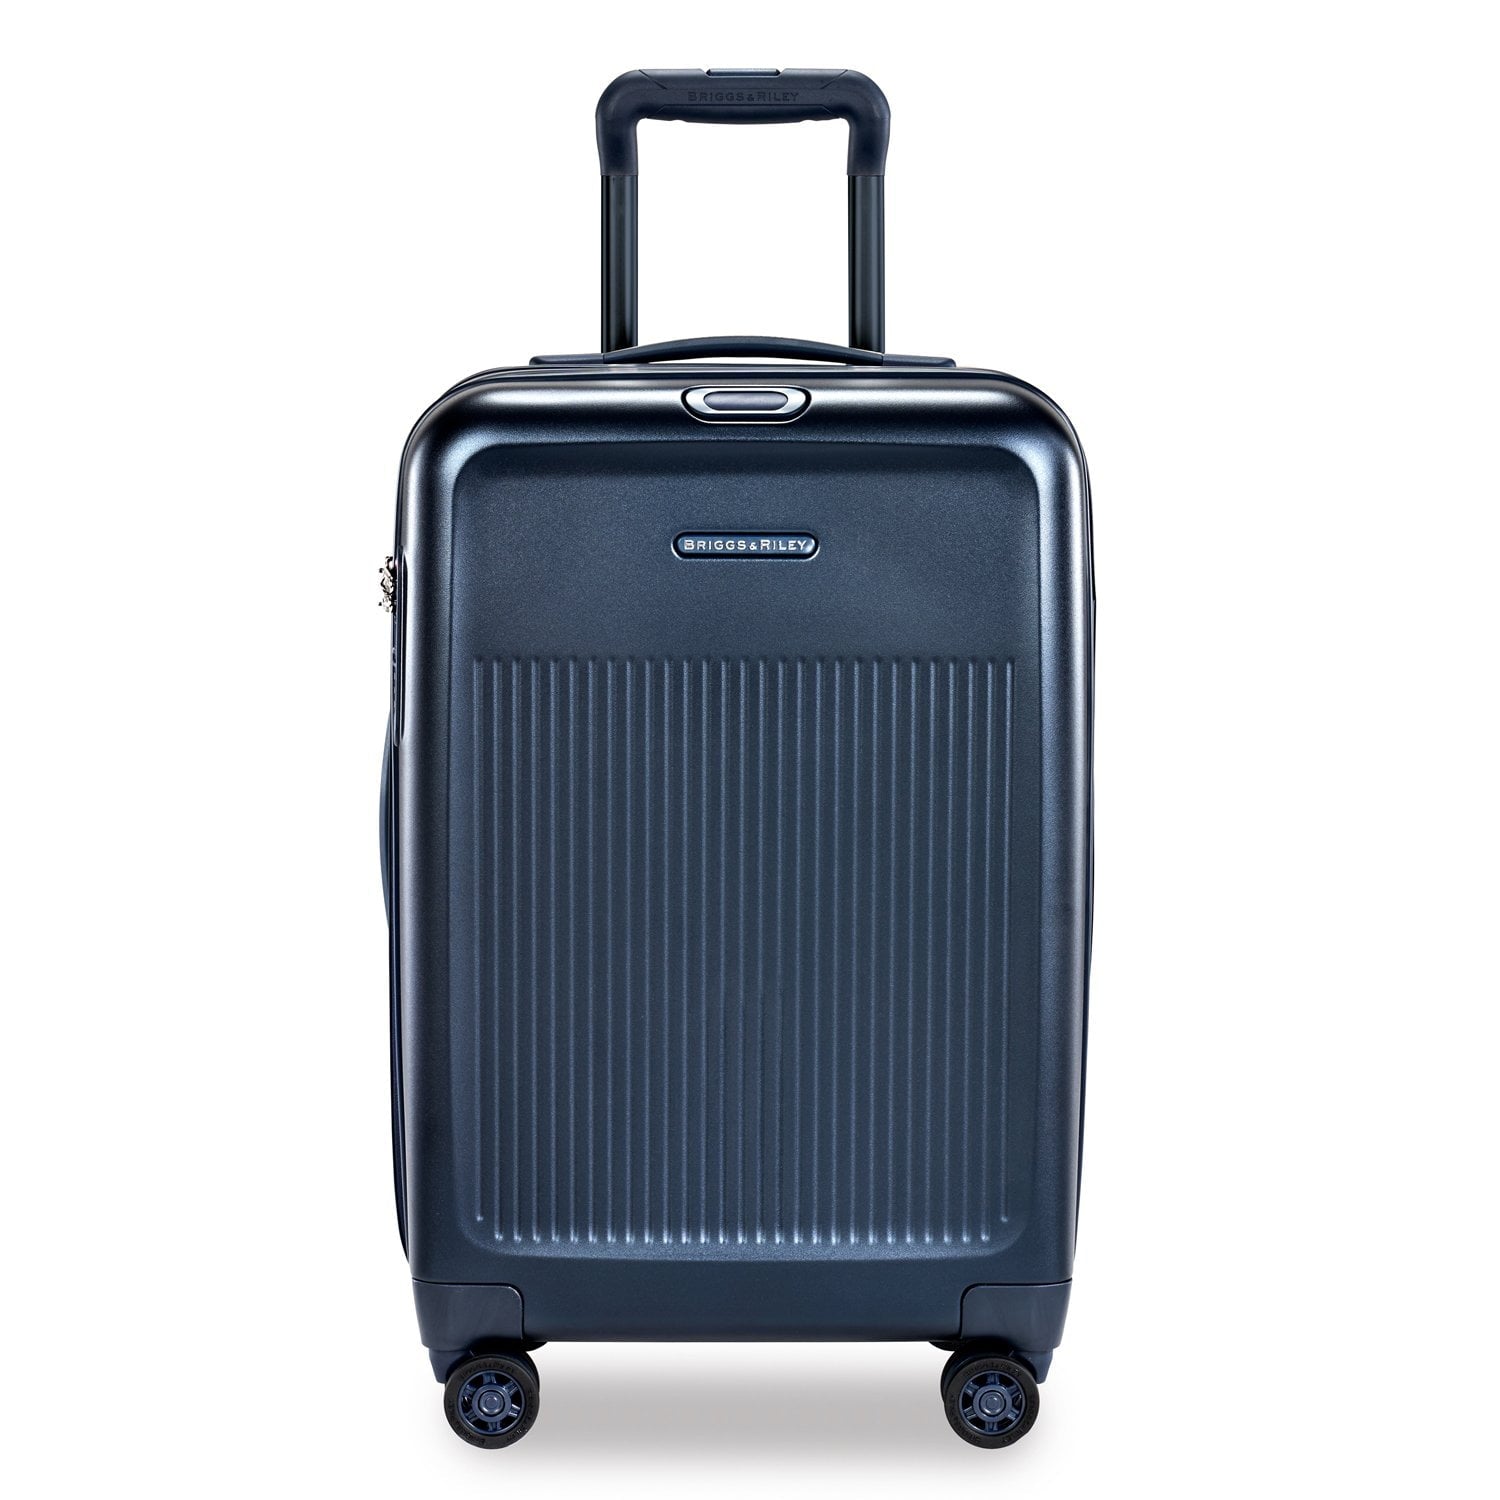 Briggs & Riley Sympatico Domestic Carry-On Expandable Spinner Luggage - Navy